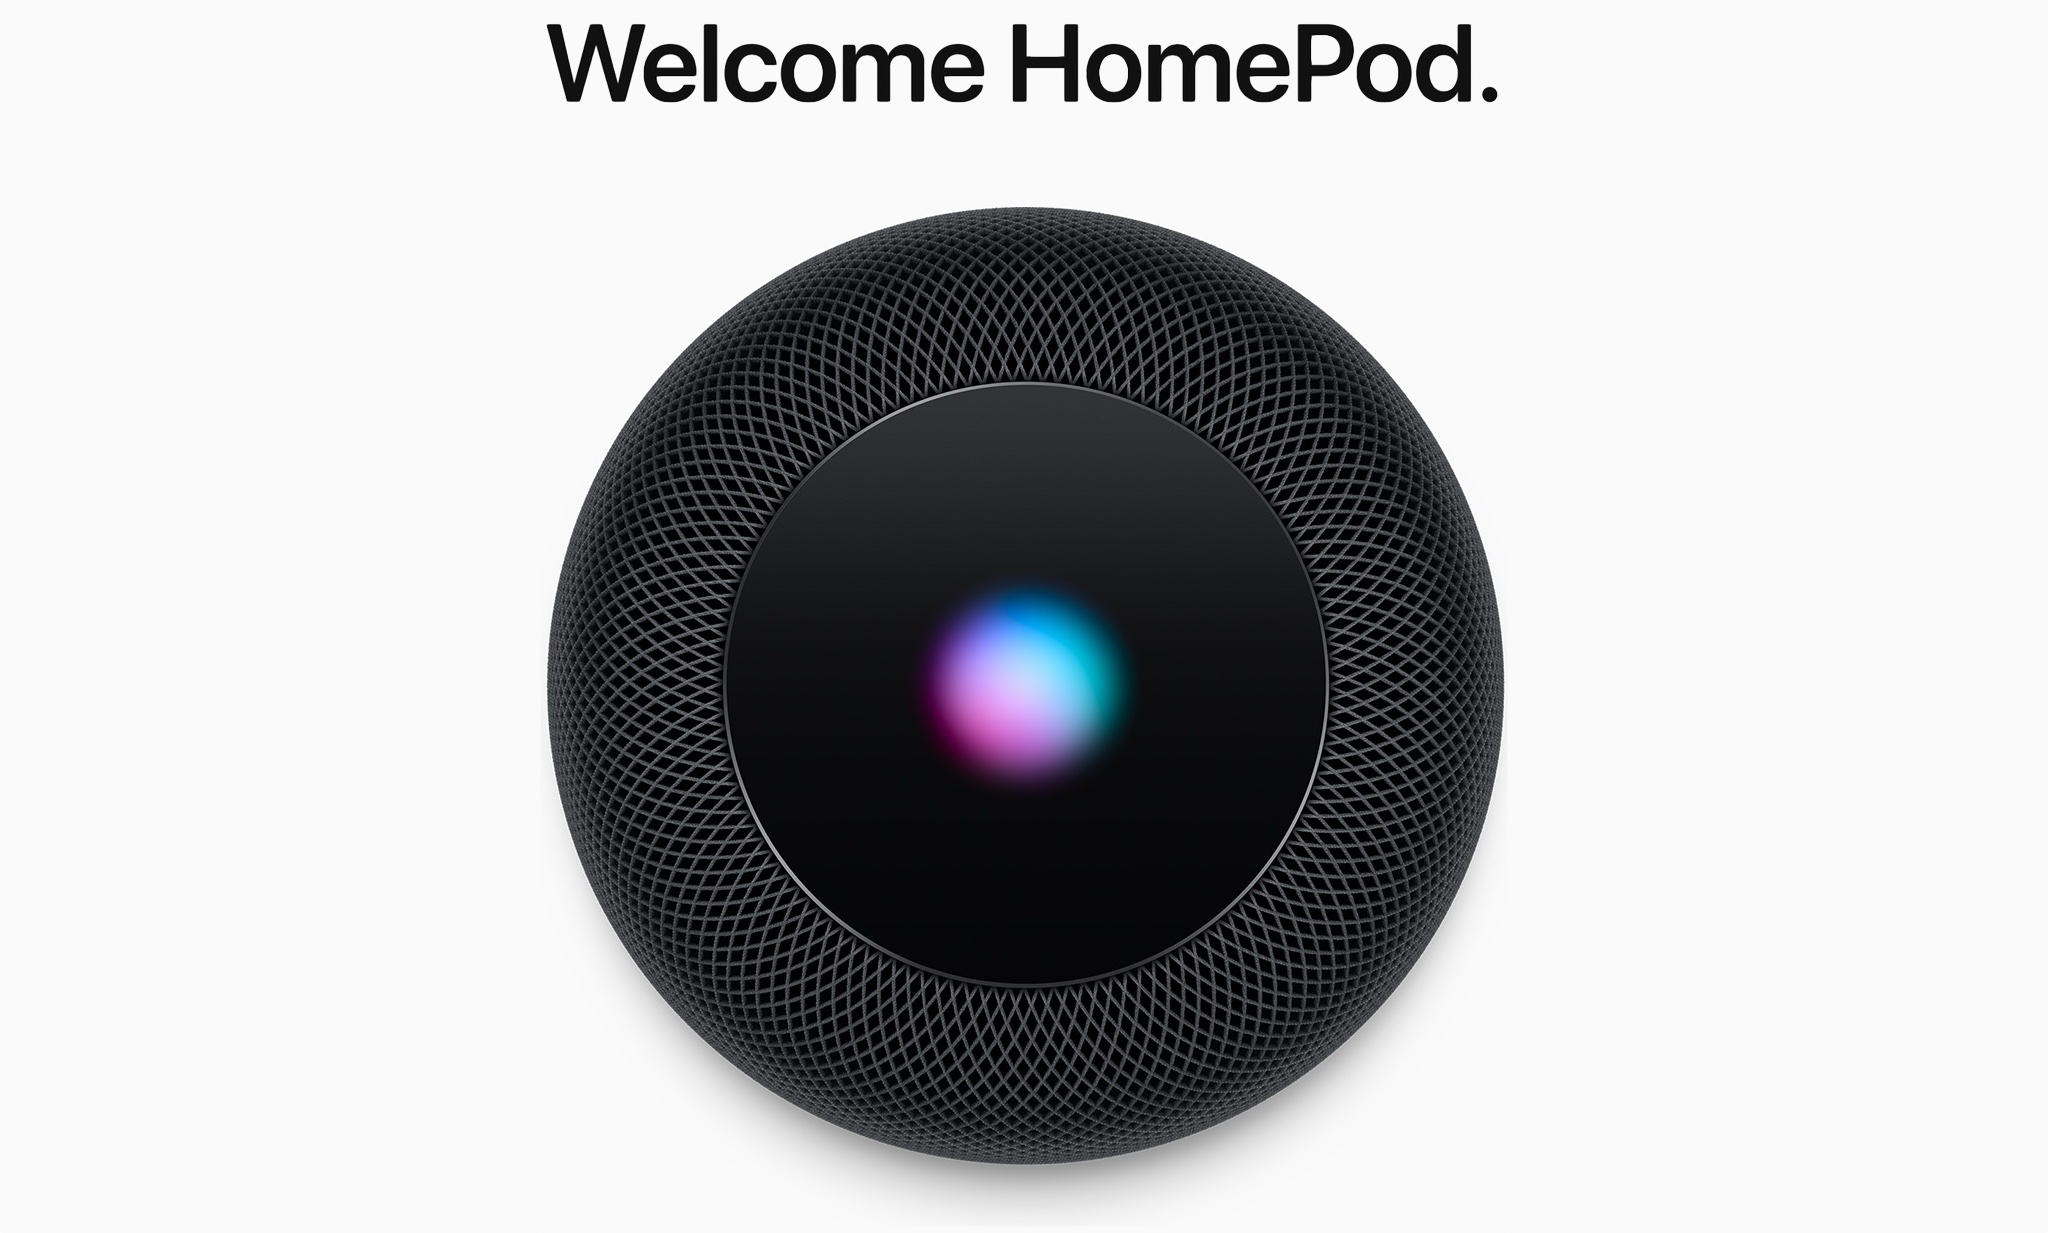 HomePod image with 'Welcome HomePod' written on top